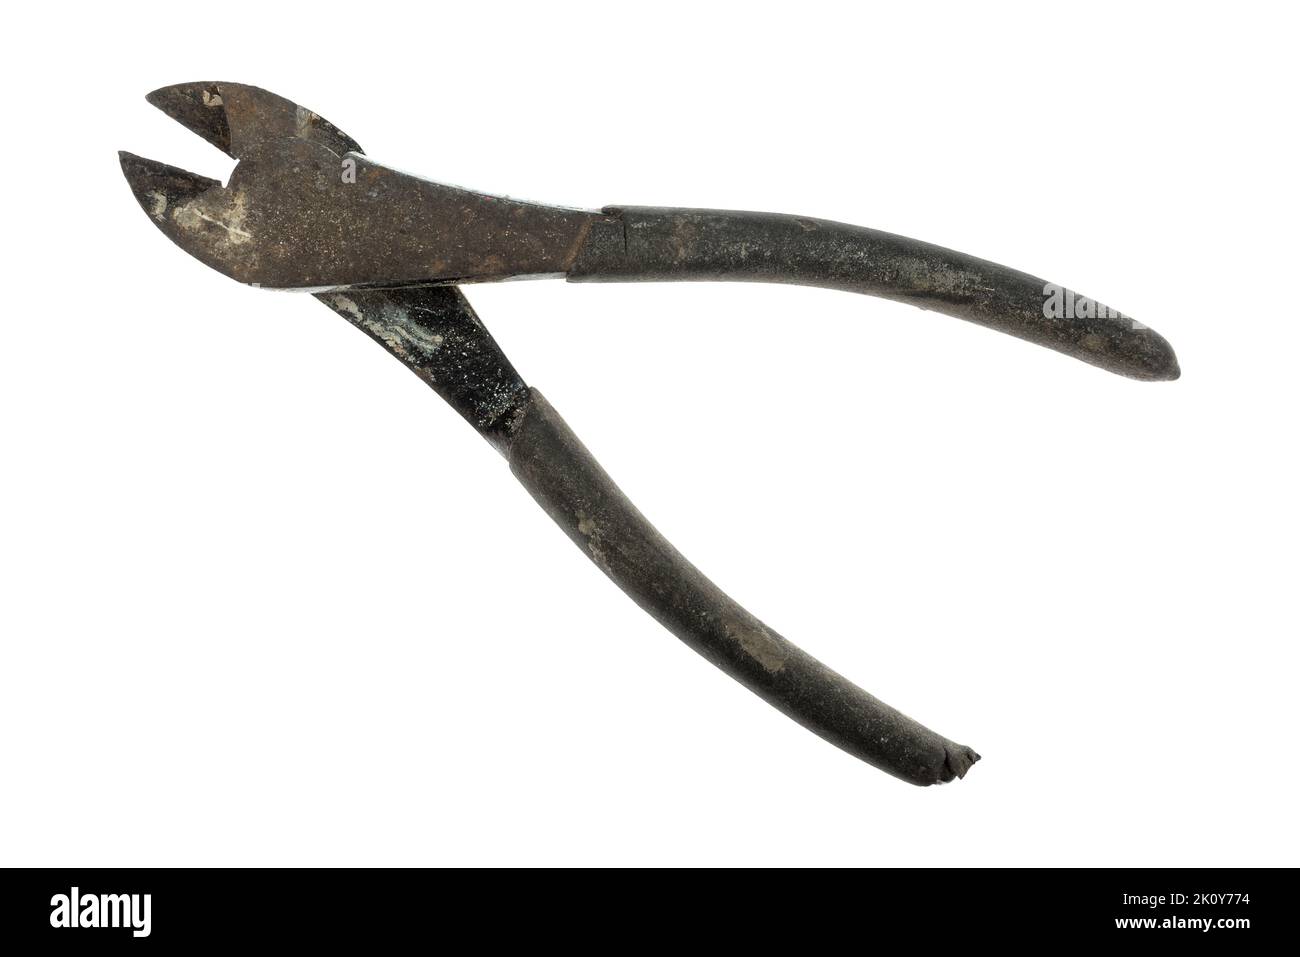 Top view of old wire cutters with rust and dirt from age with plastic on the handles isolated on a white background. Stock Photo